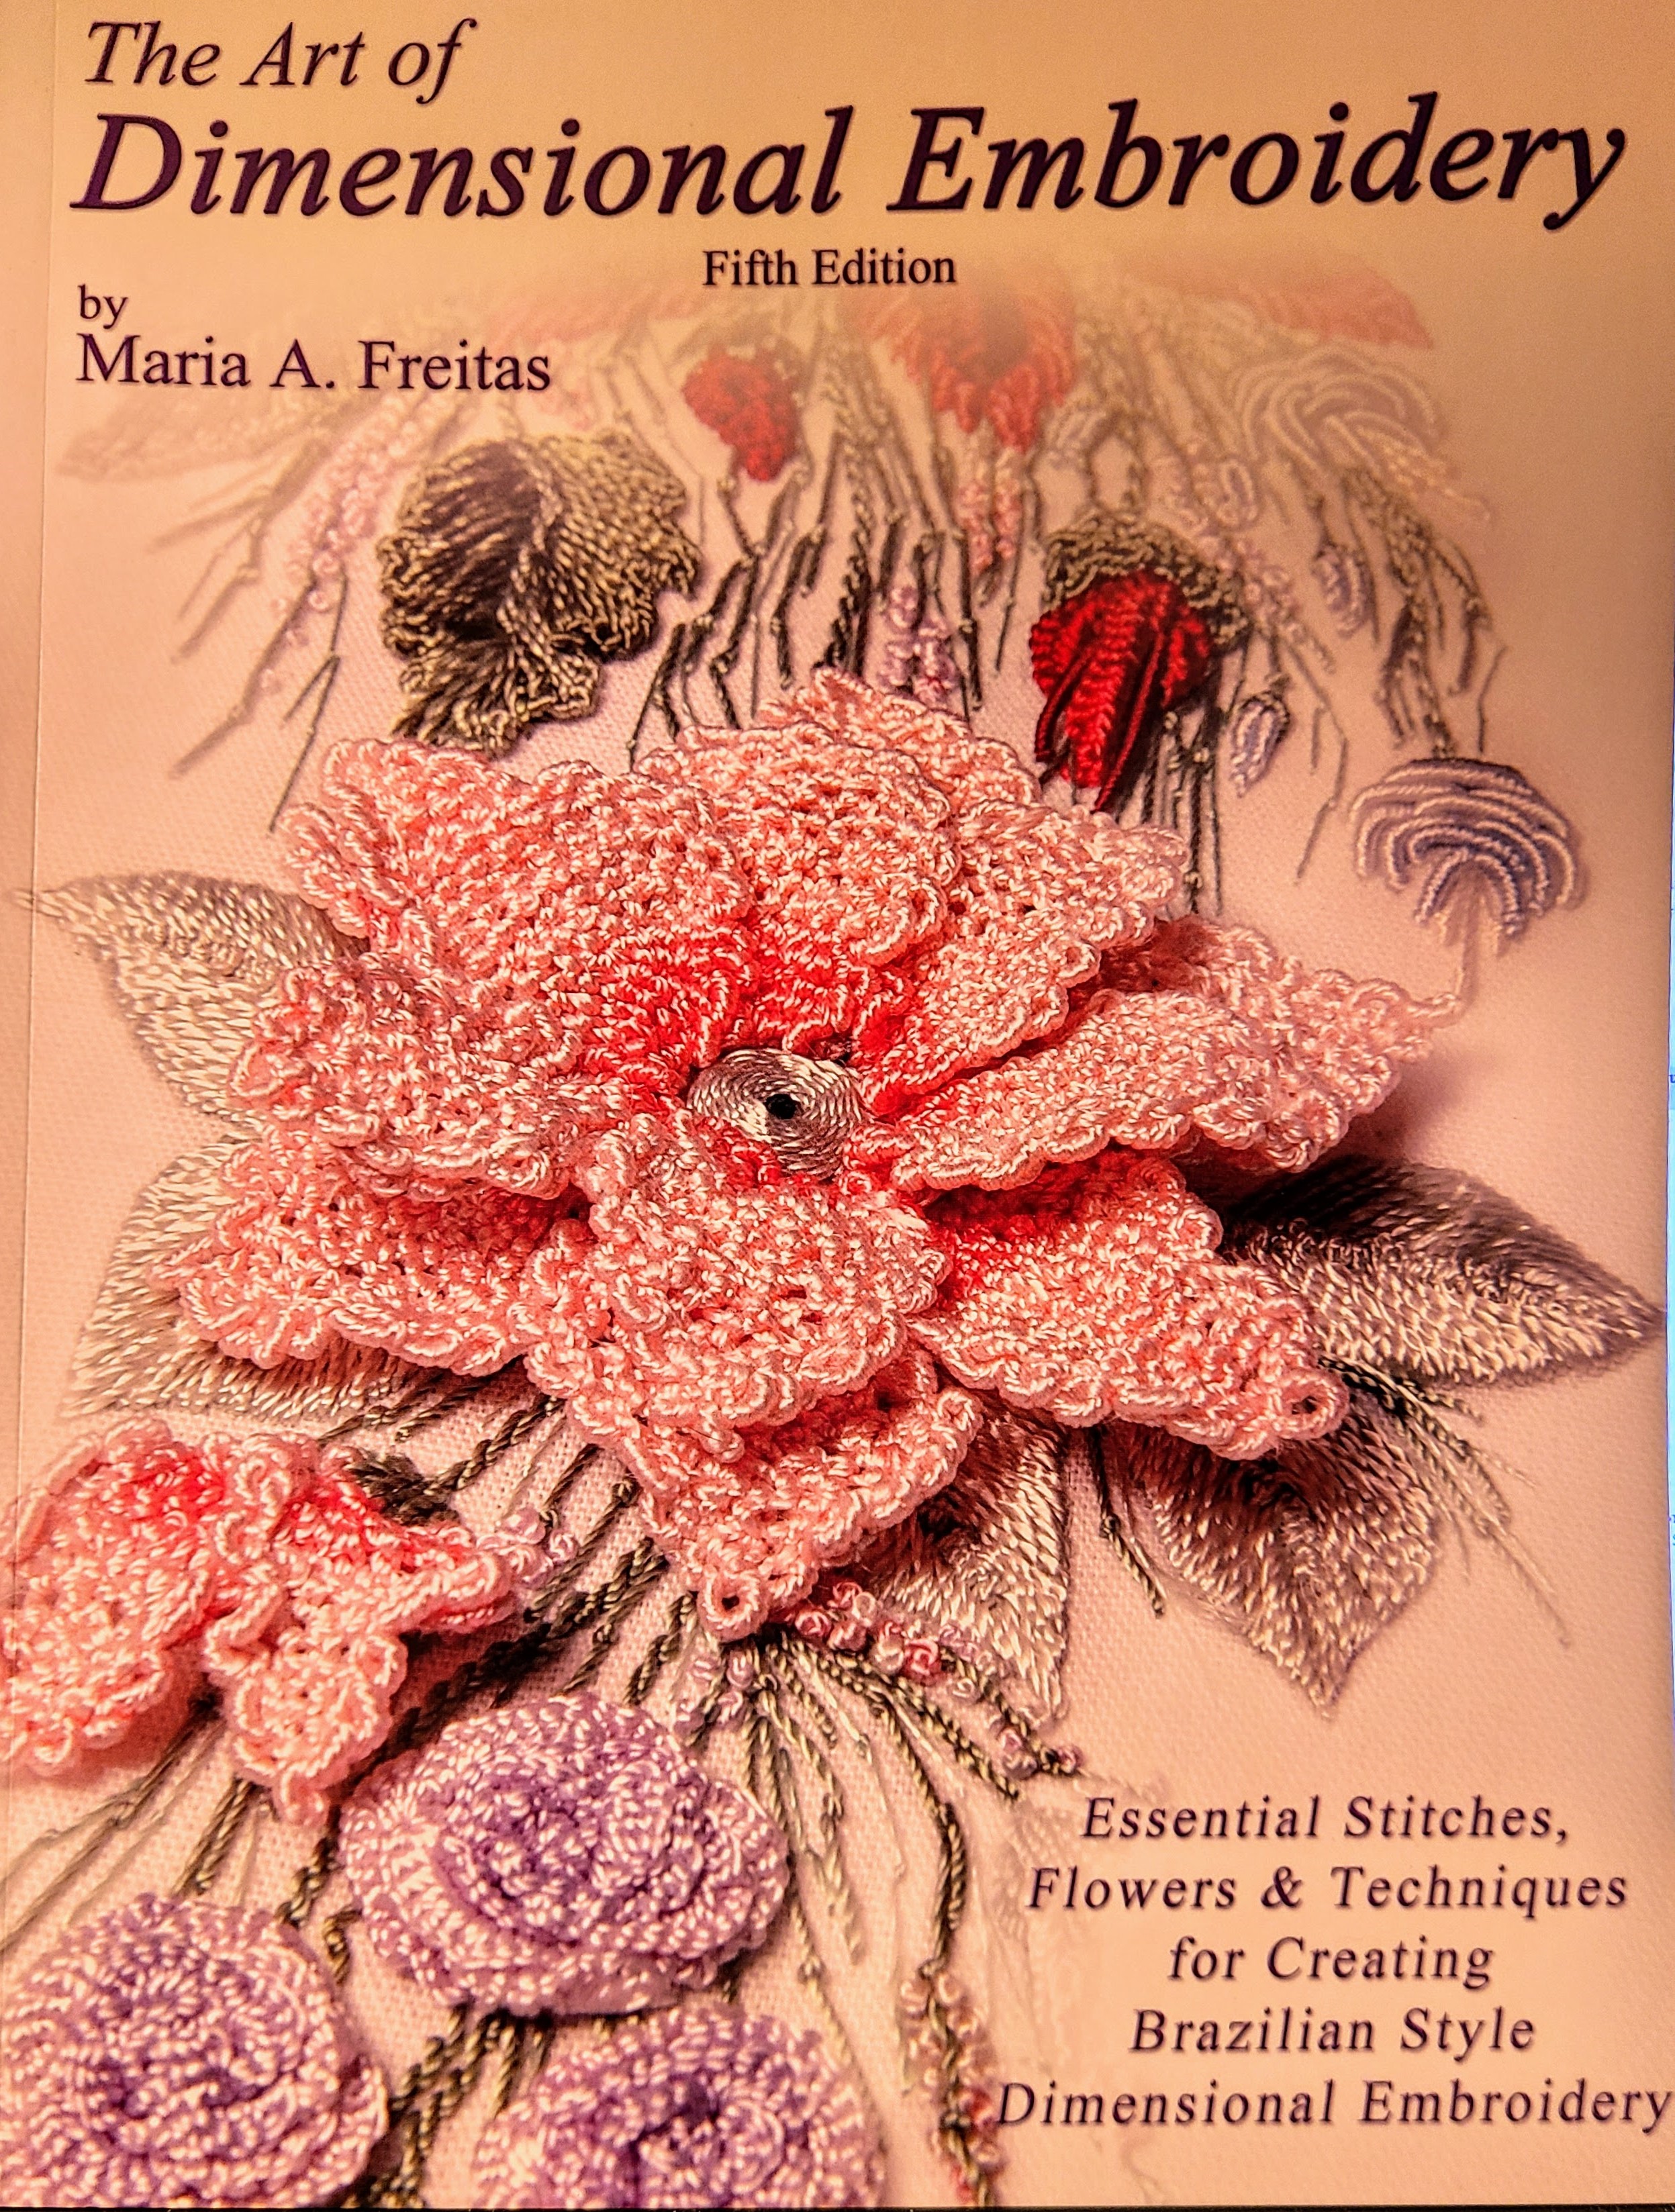 The Art of Dimensional Embroidery Book